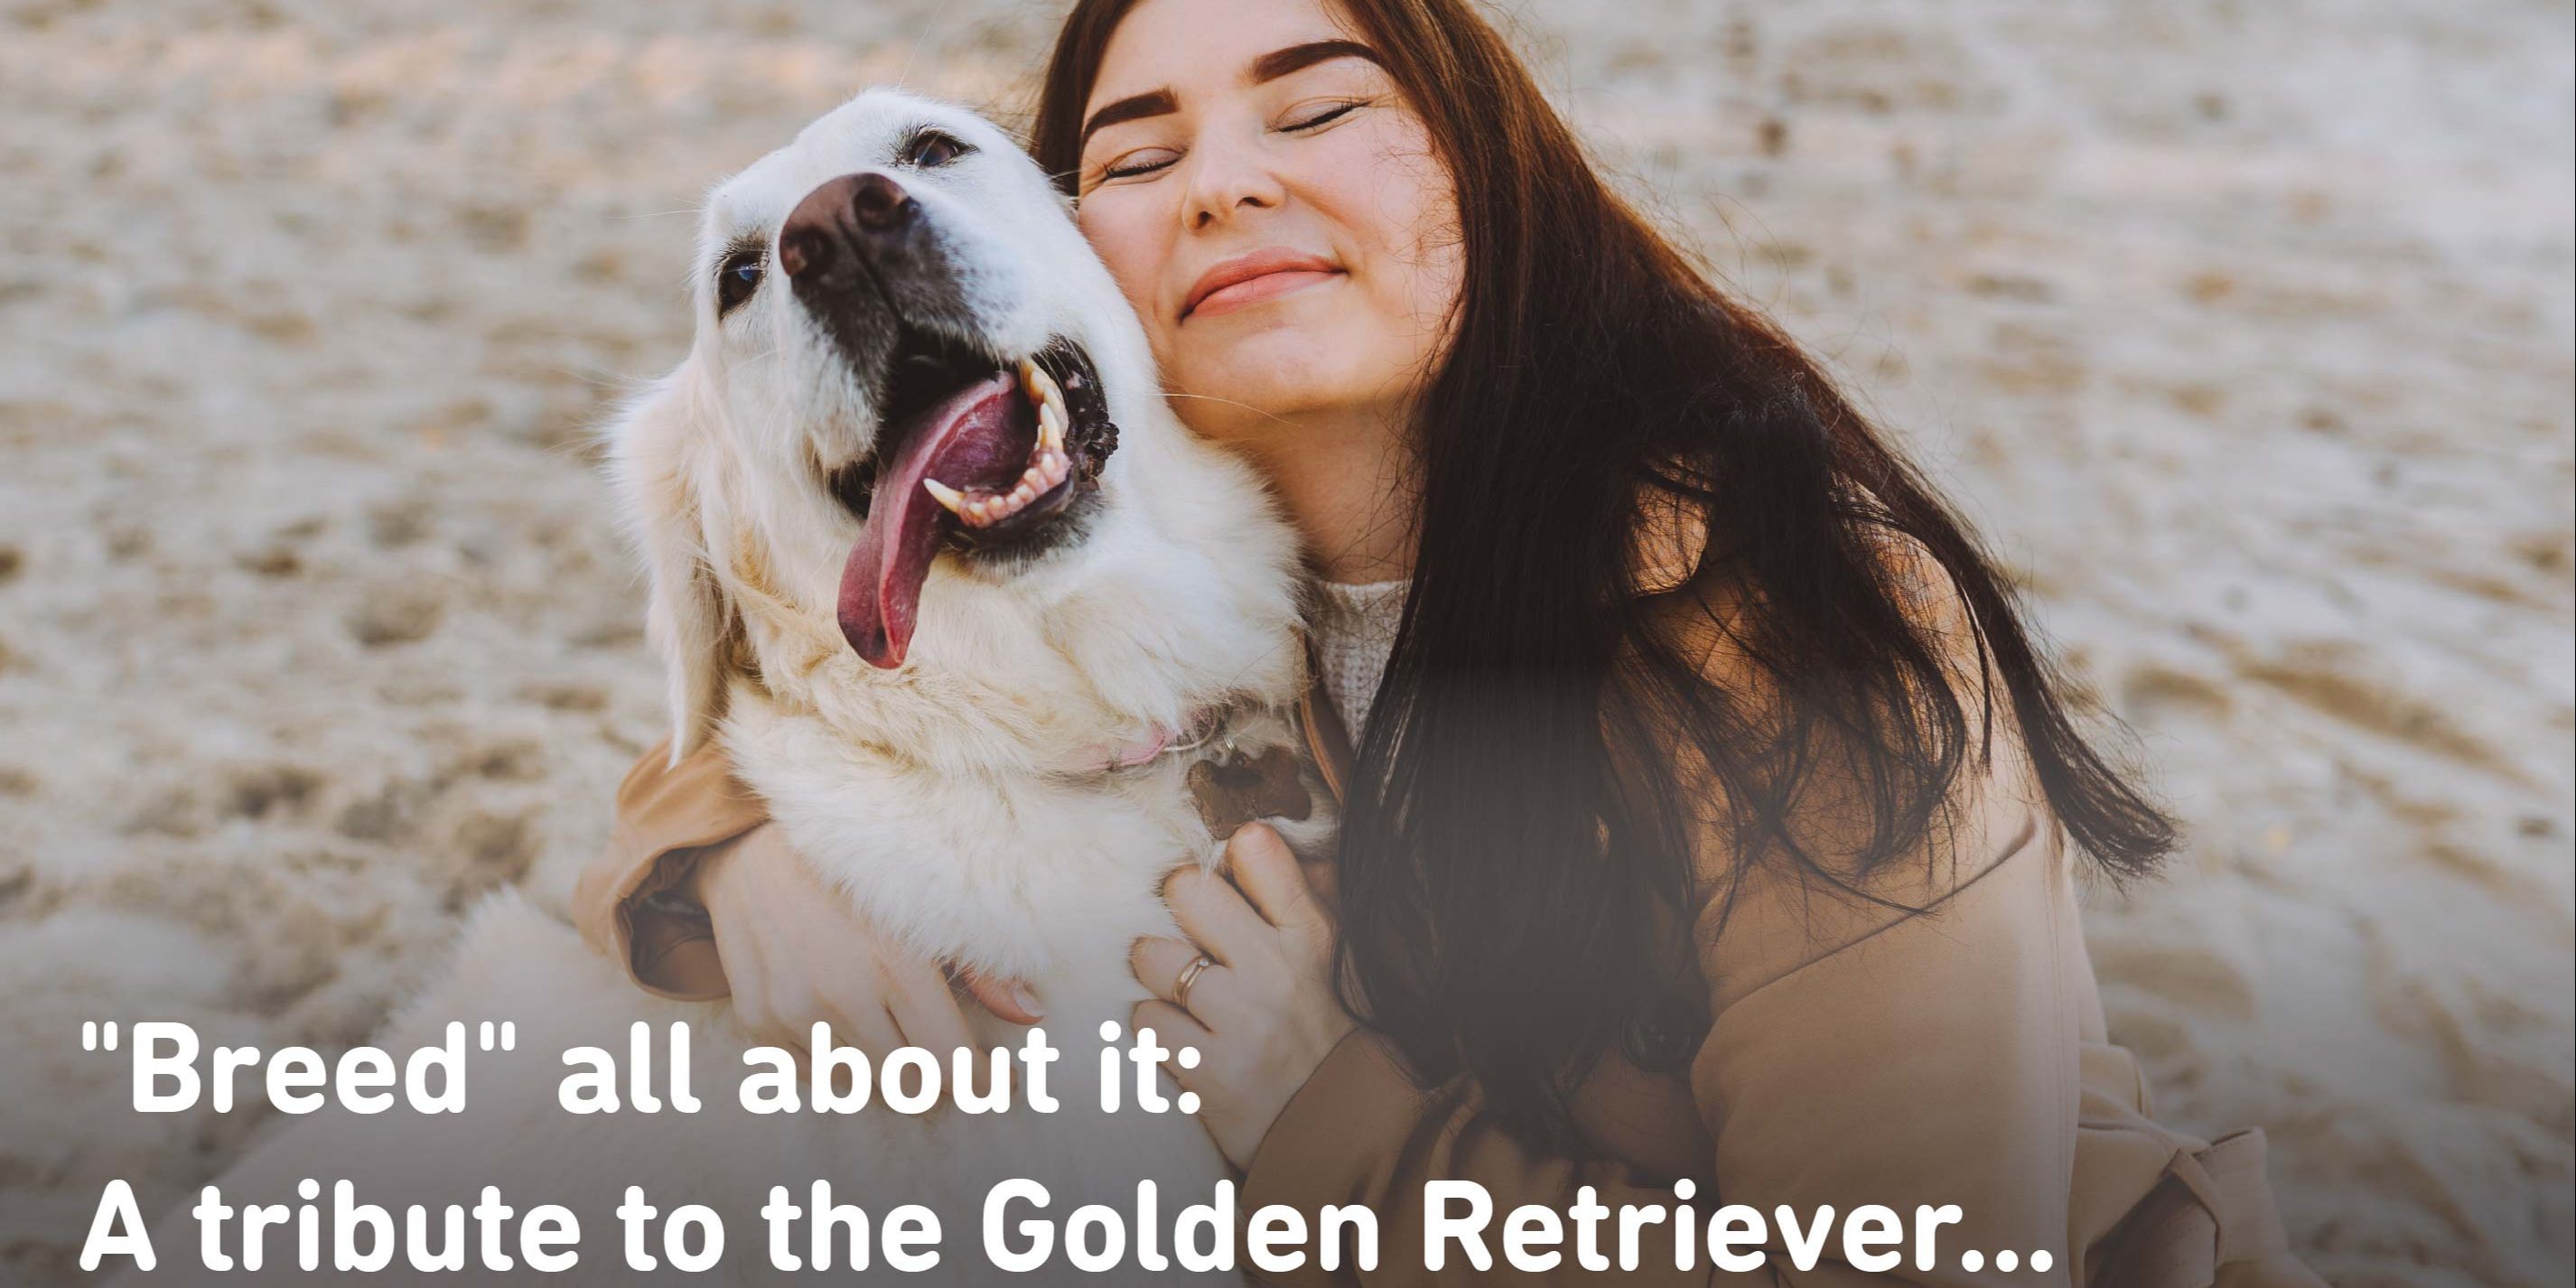 Breed all about it - A tribute to the Golden Retriever...